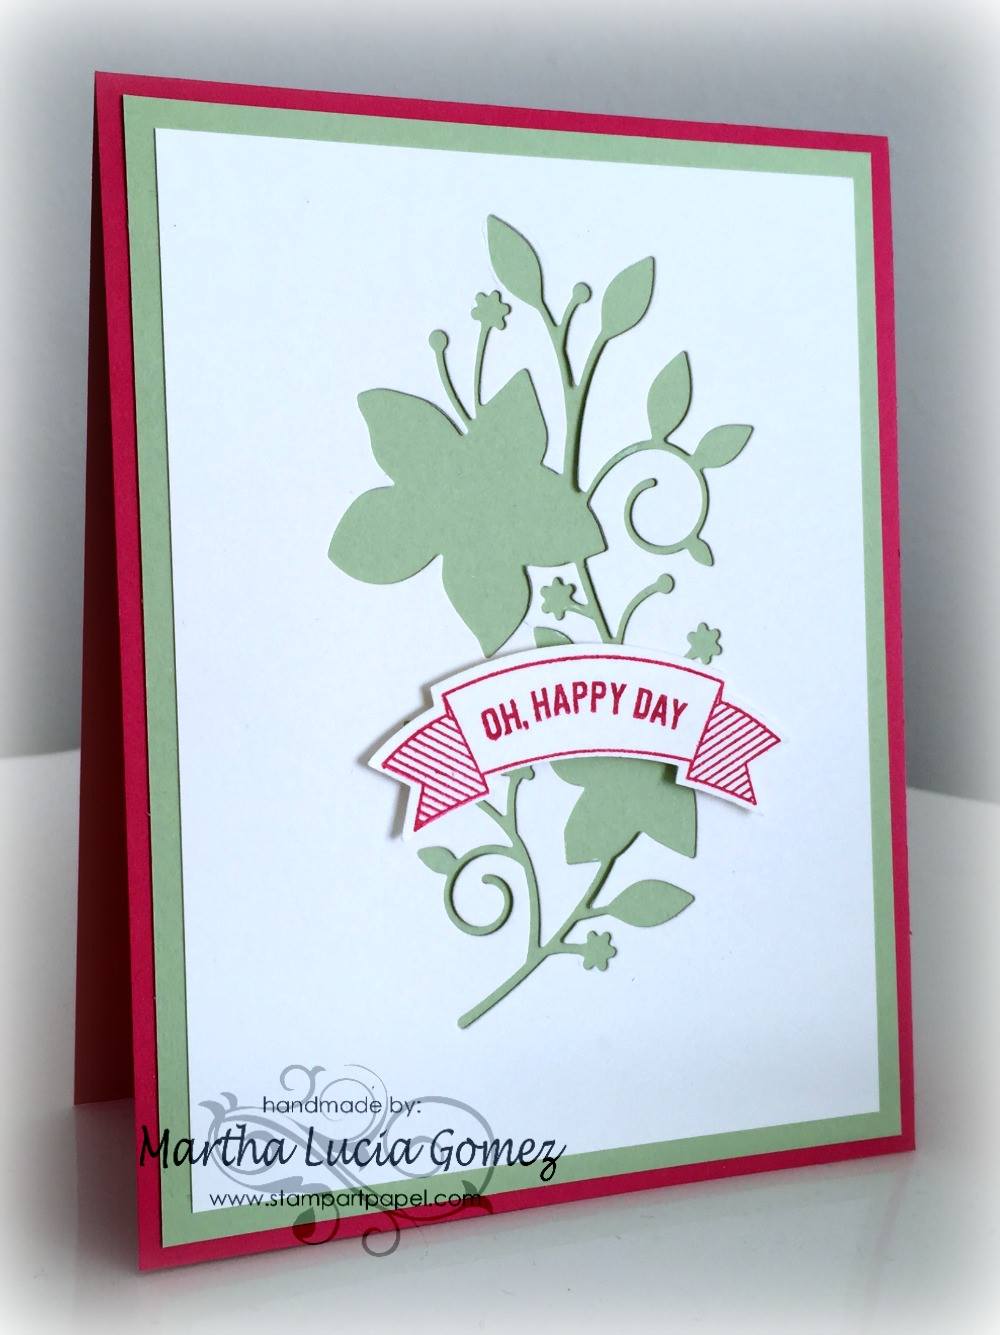 How to Recycle Negative Die Cuts in Handmade Cards